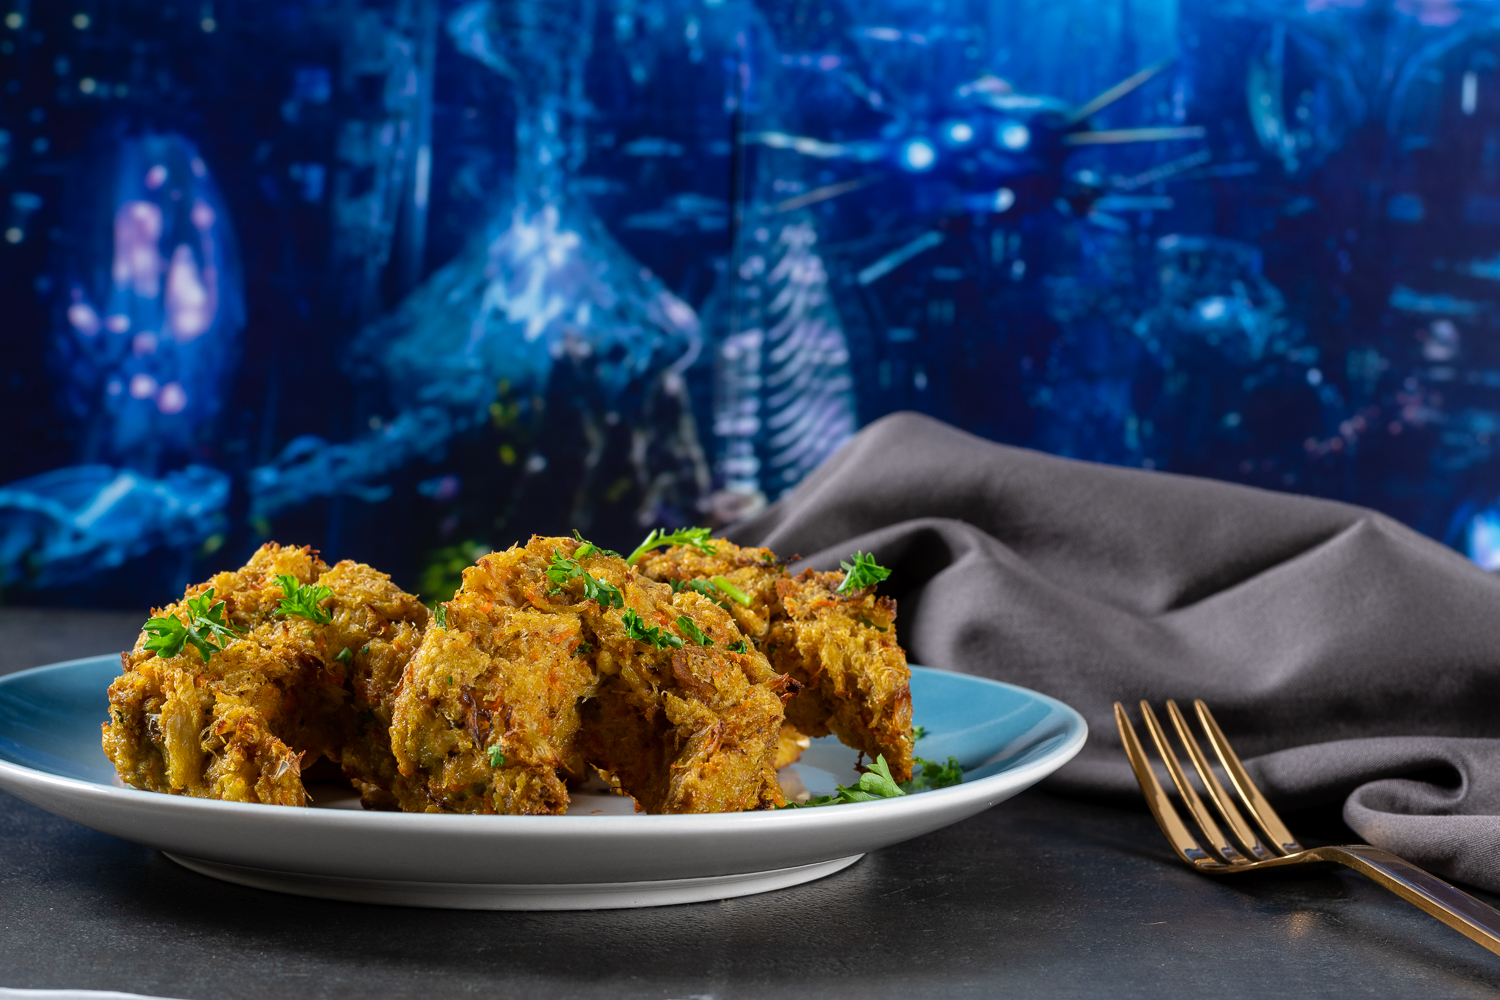 Inspired by DC's latest film Aquaman, The Geeks have created delicious Atlantean Crab Cakes. These tasty treats are perfect for a movie night! 2geekswhoeat.com #ComicBookRecipes #CrabCakes #AppetizerRecipes #Seafood #SummerRecipes #DCComics